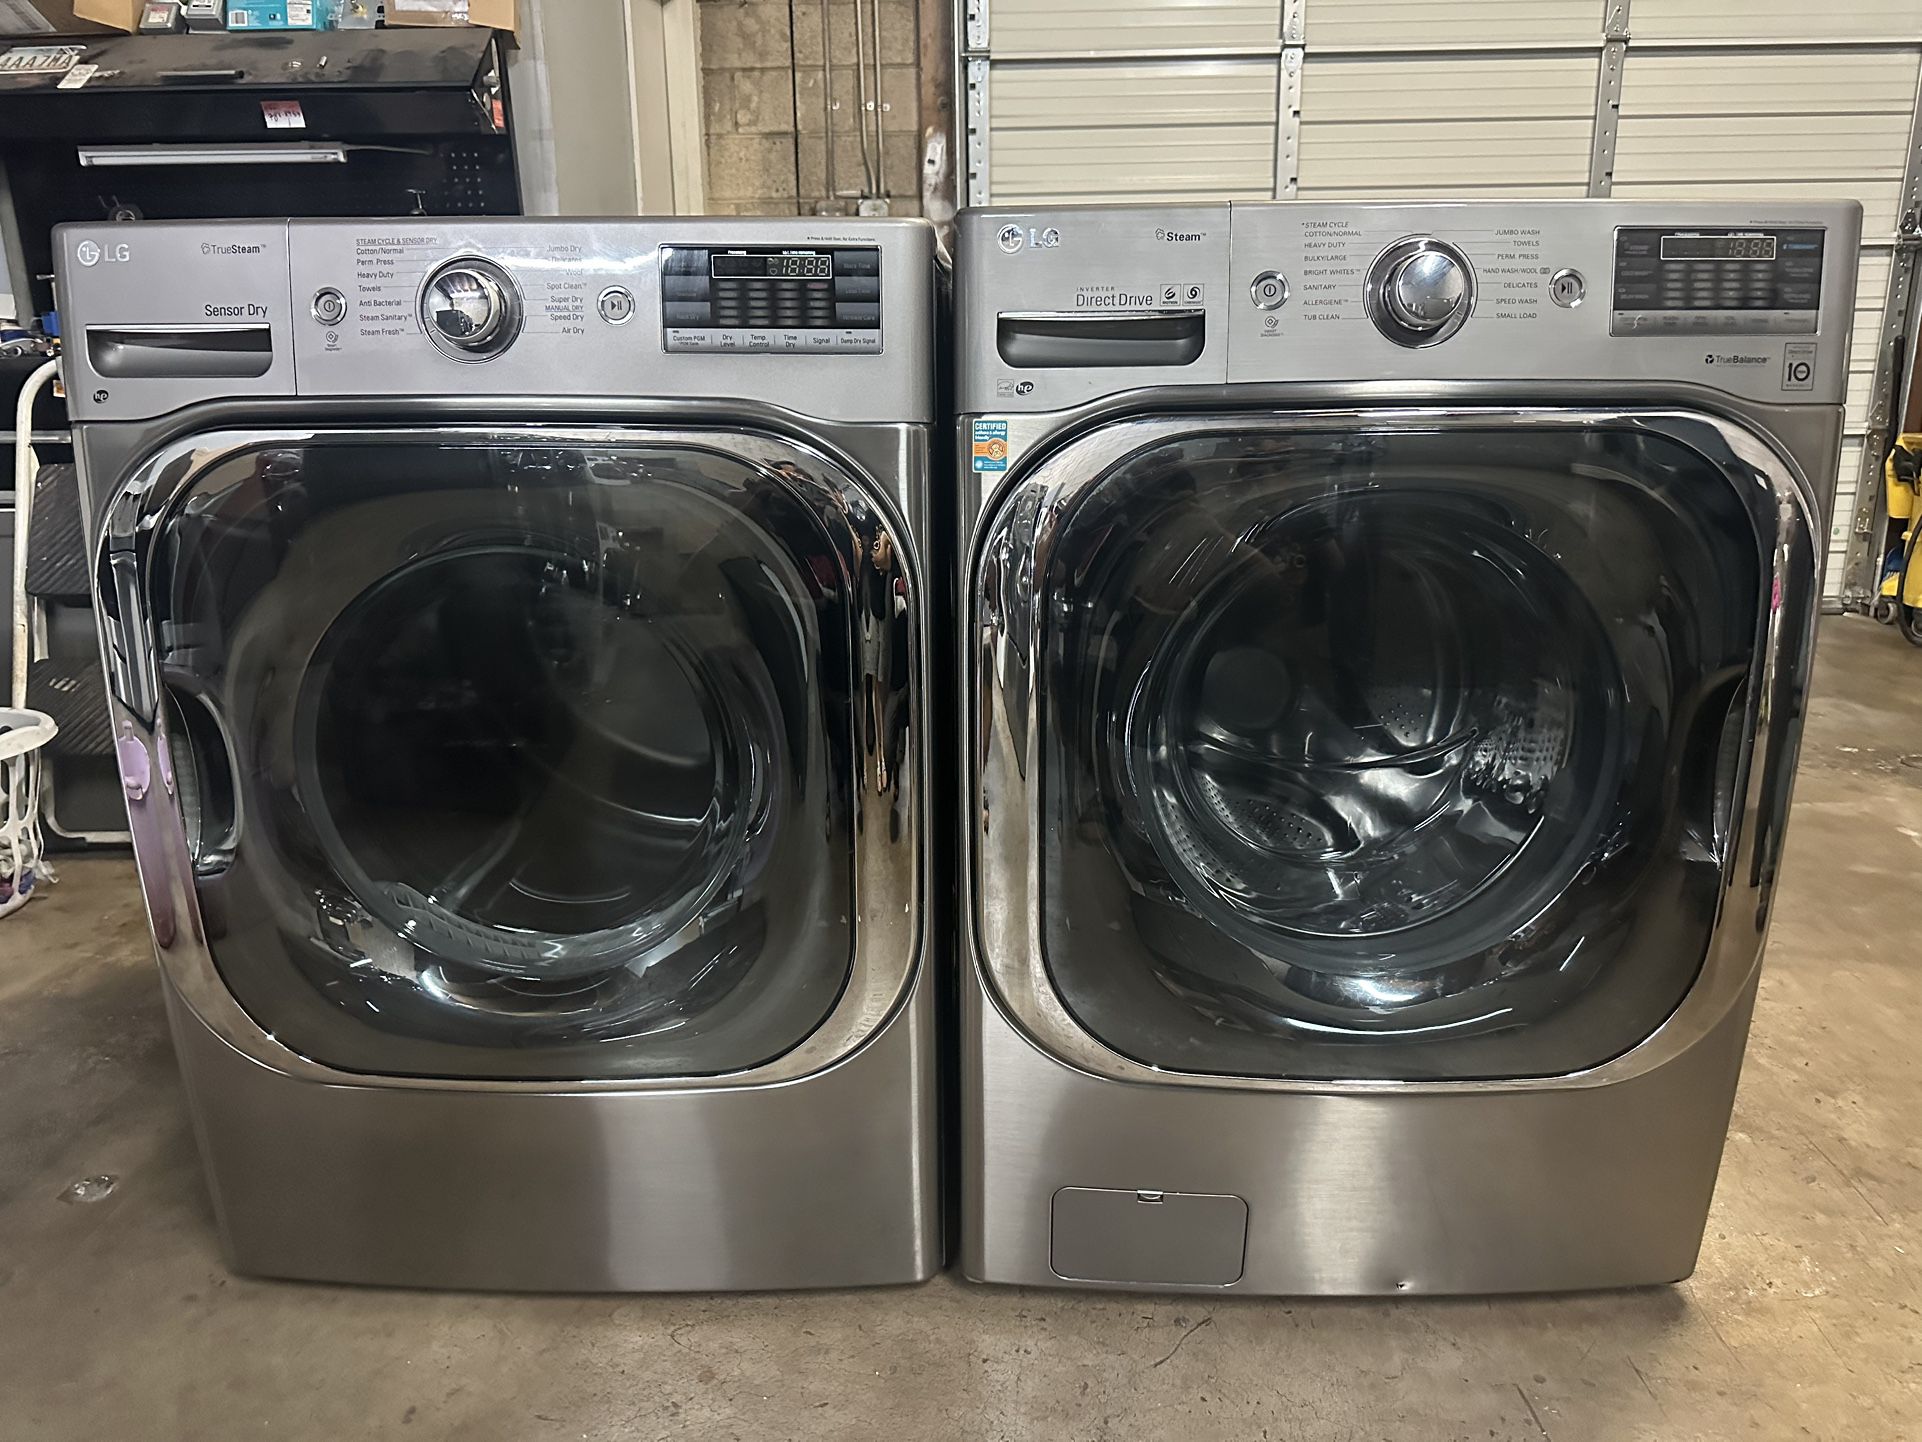 29 MEGA CAPACITY LG WASHER AND ELECTRIC DRYER SET LIKE NEW CONDITIONS 